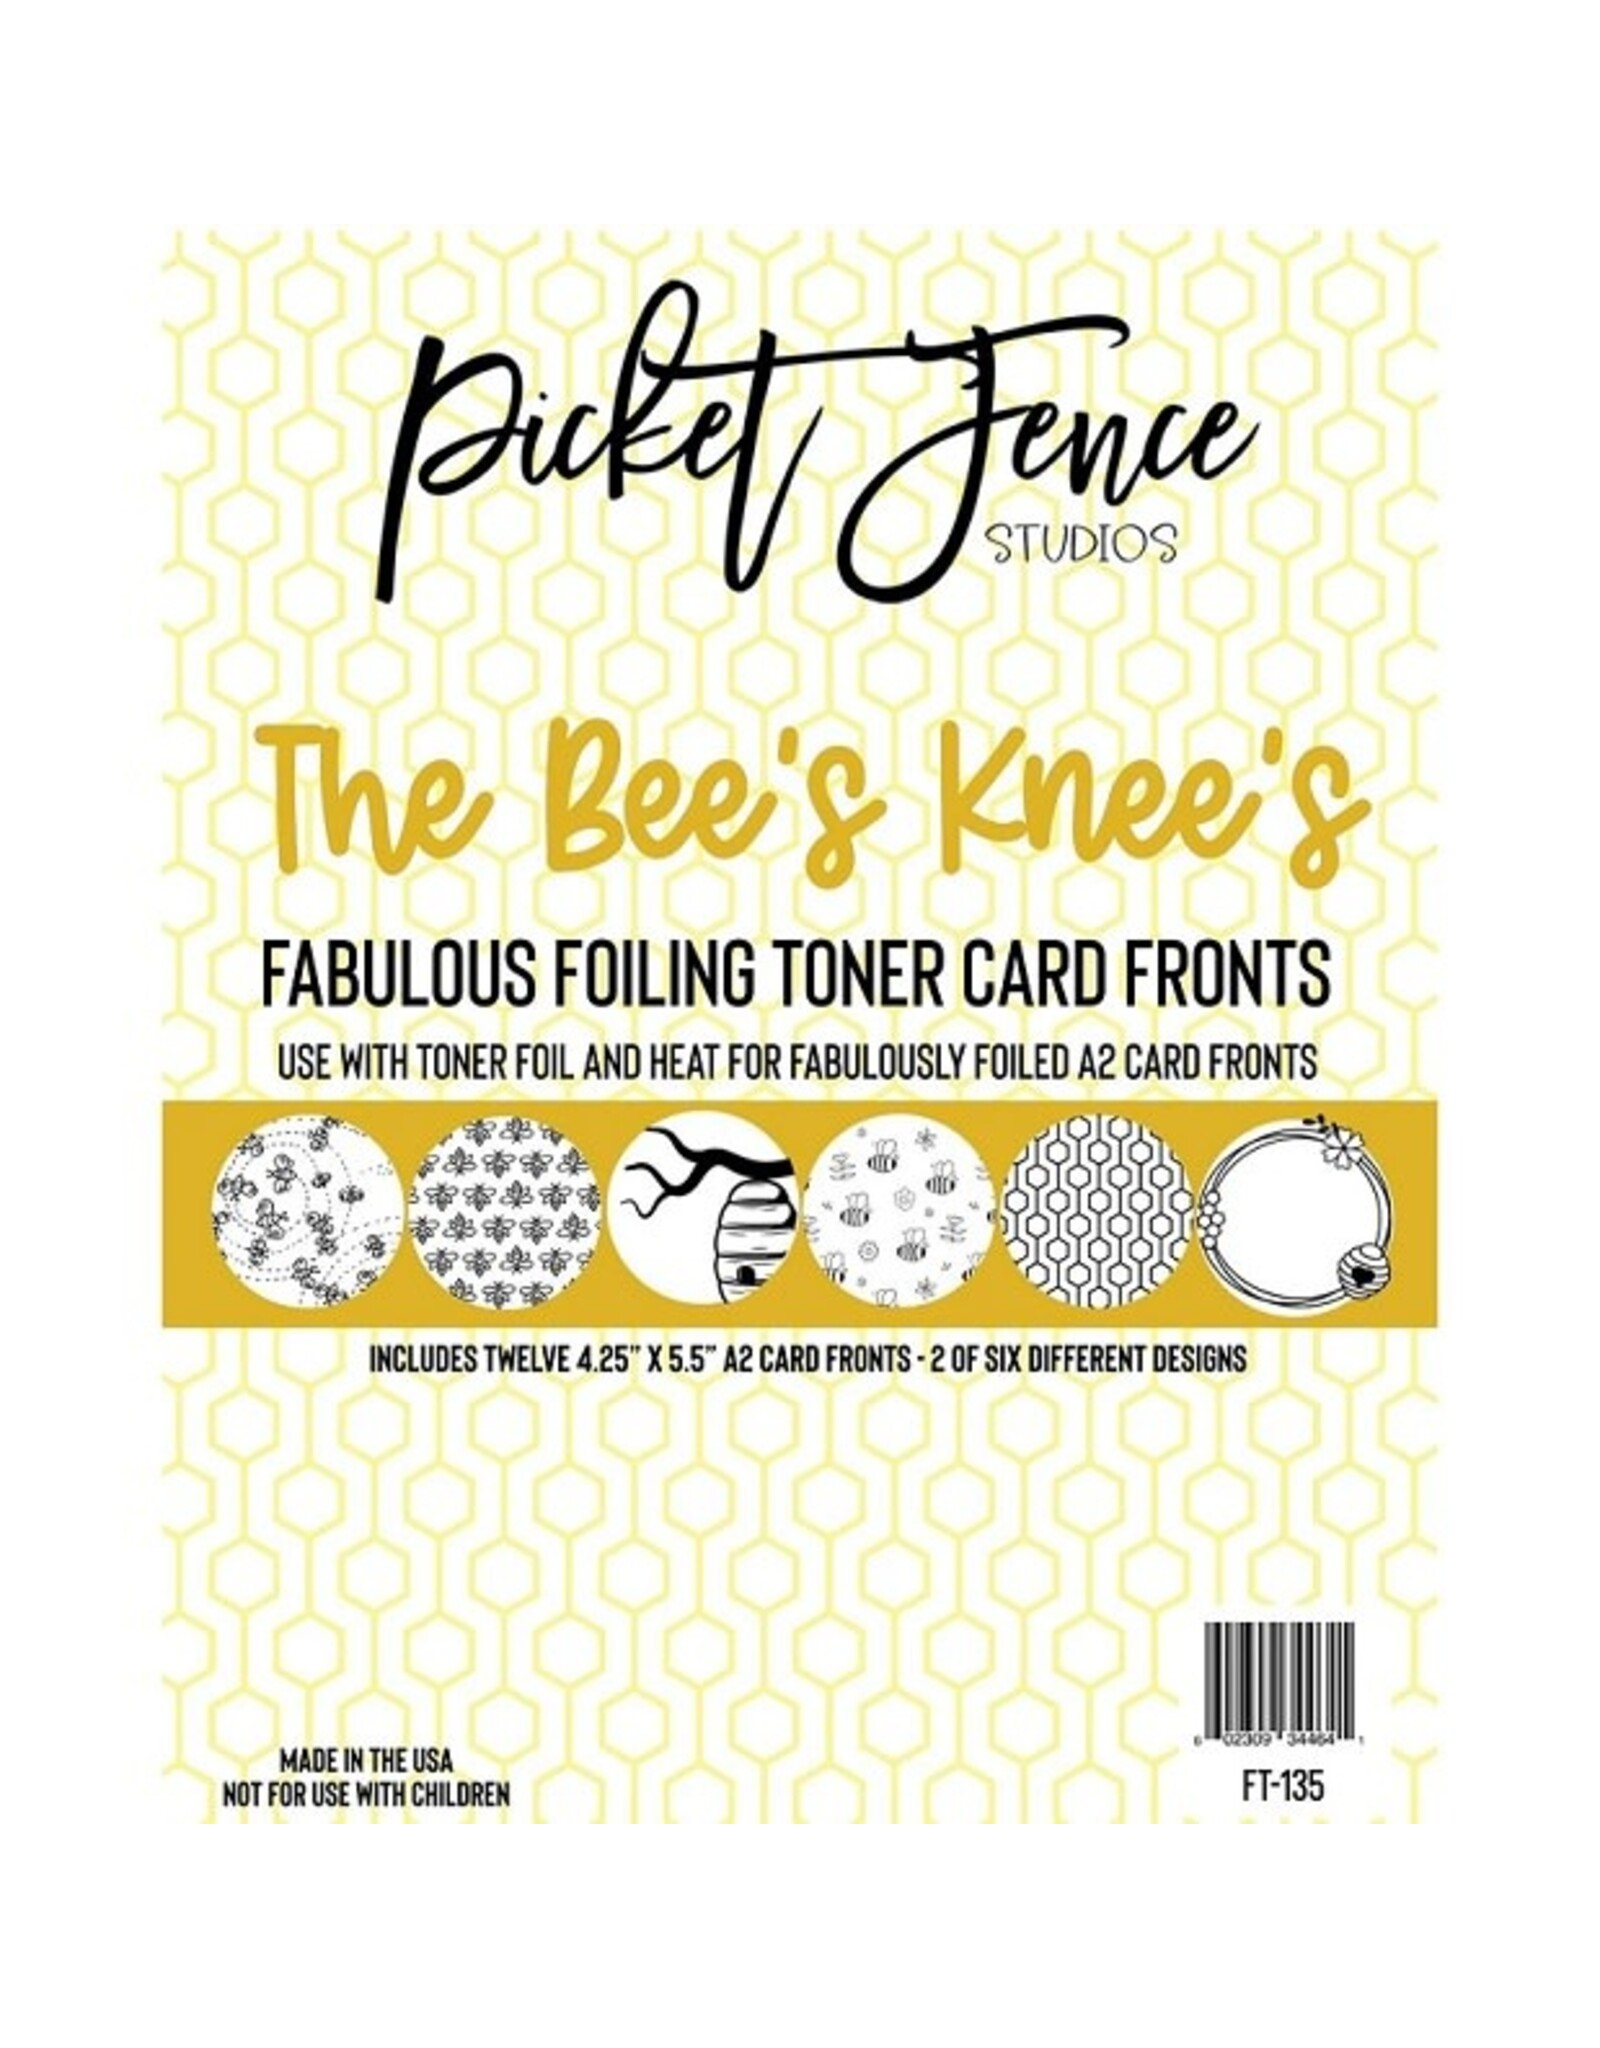 PICKET FENCE STUDIOS Fabulous Foiling Toner A2 Card Fronts - The Bee's Knees